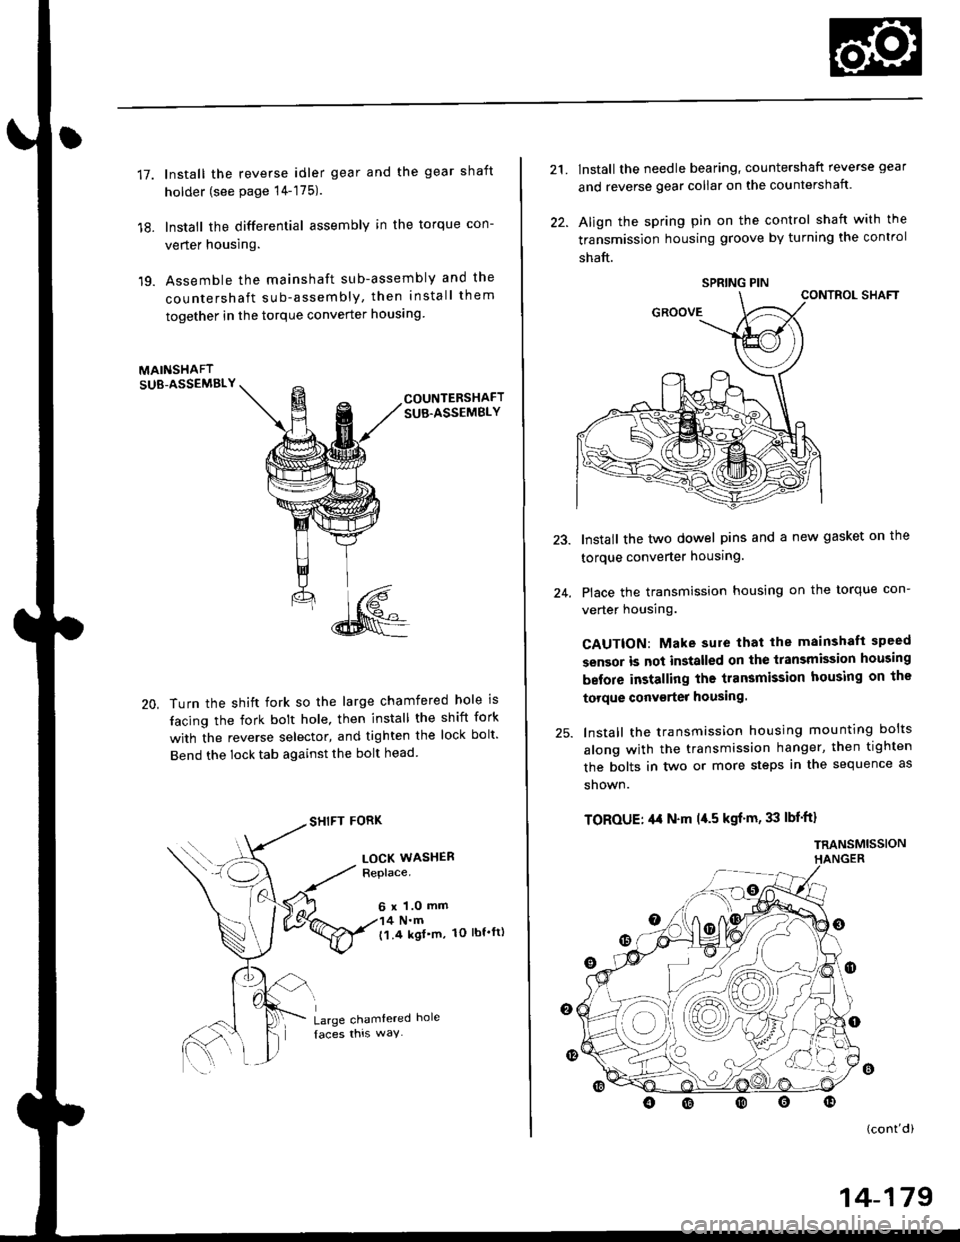 HONDA CIVIC 1996 6.G Service Manual 17.
18.
19.
lnstall the reverse idler gear and the gear shaft
holder (see page 14-175).
lnstall the differential assembly in the torque con-
verter housing.
Assemble the mainshaft sub-assembly and the